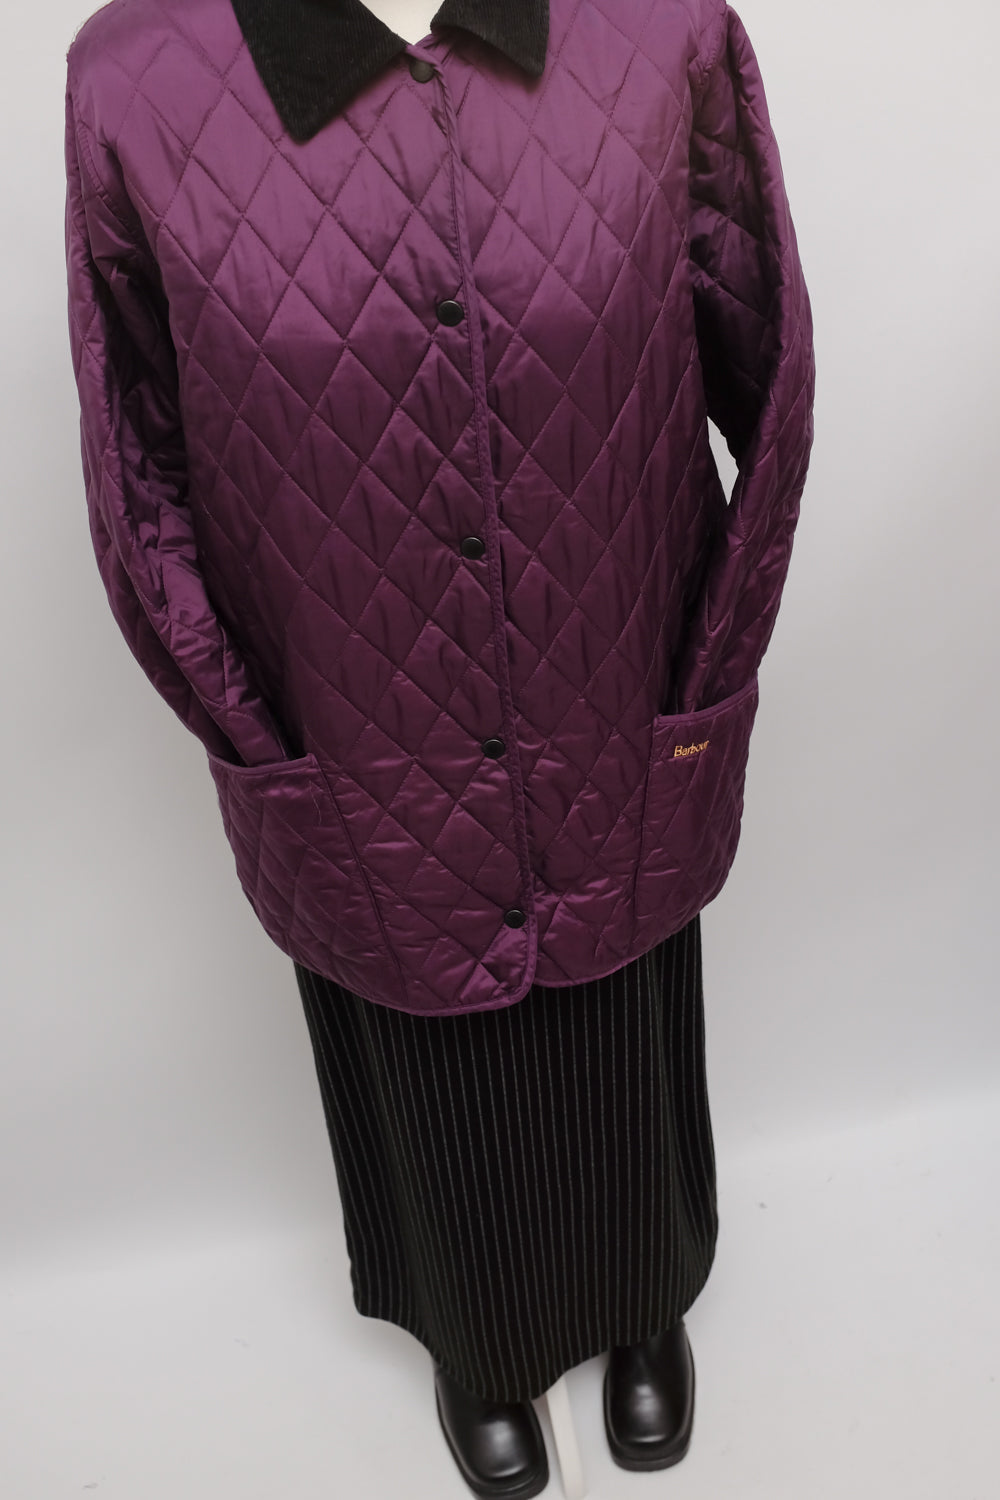 BARBOUR CLASSY PURPLE QUILTED JACKET